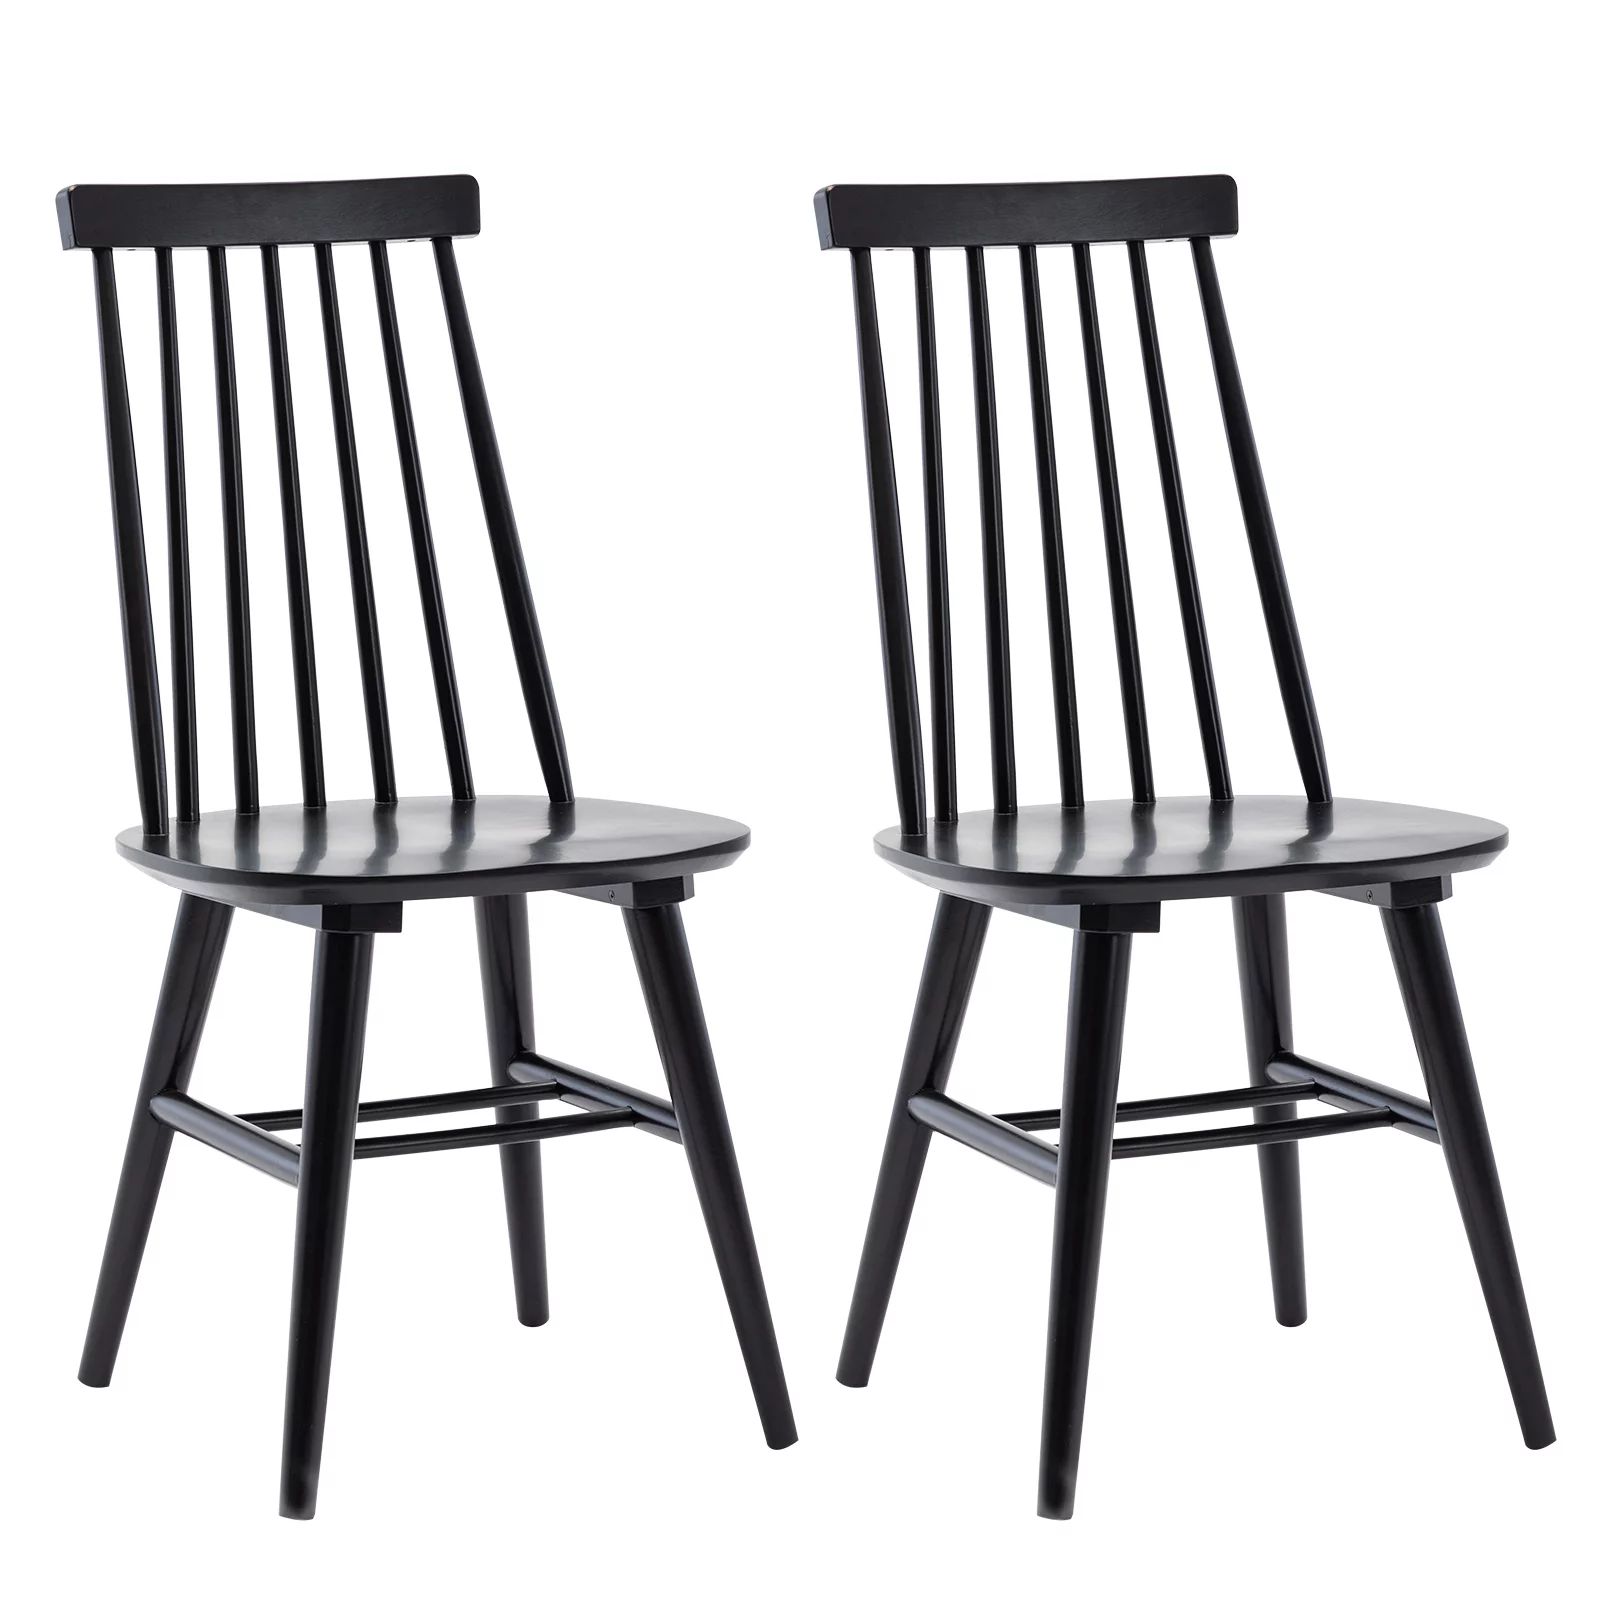 Duhome Elegant Lifestyle Dining Chairs Set of 2, Wood Dining Room Chairs Slat Back Kitchen Room C... | Walmart (US)